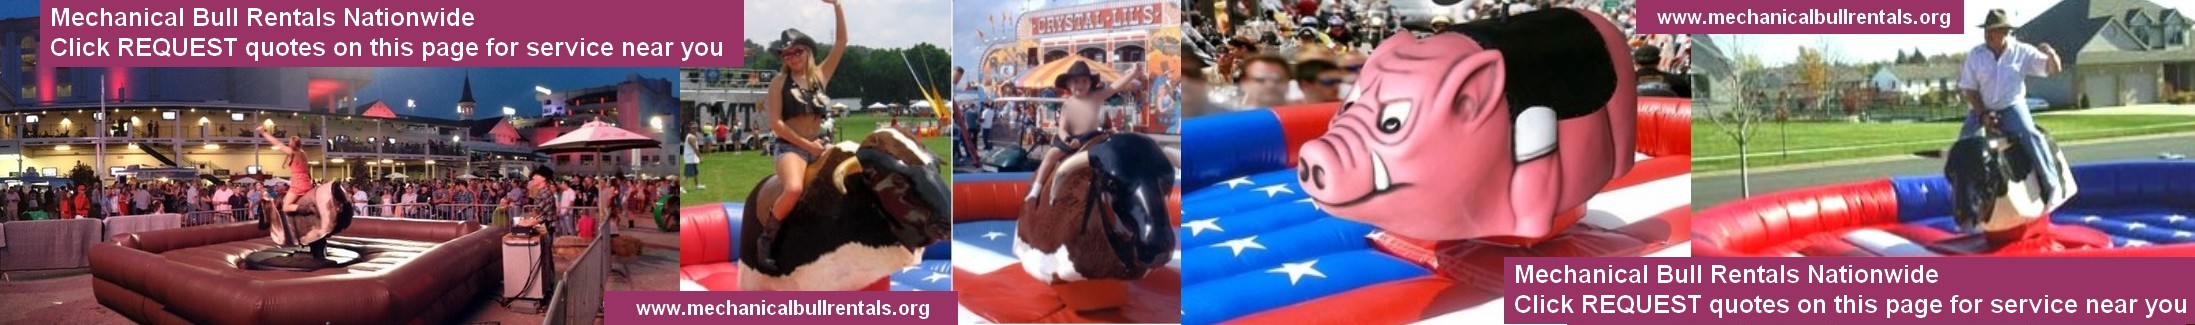 Mechanical Bull Rentals Monterey California CA and near you. Free referrals to local mechanical bull companies LOGO